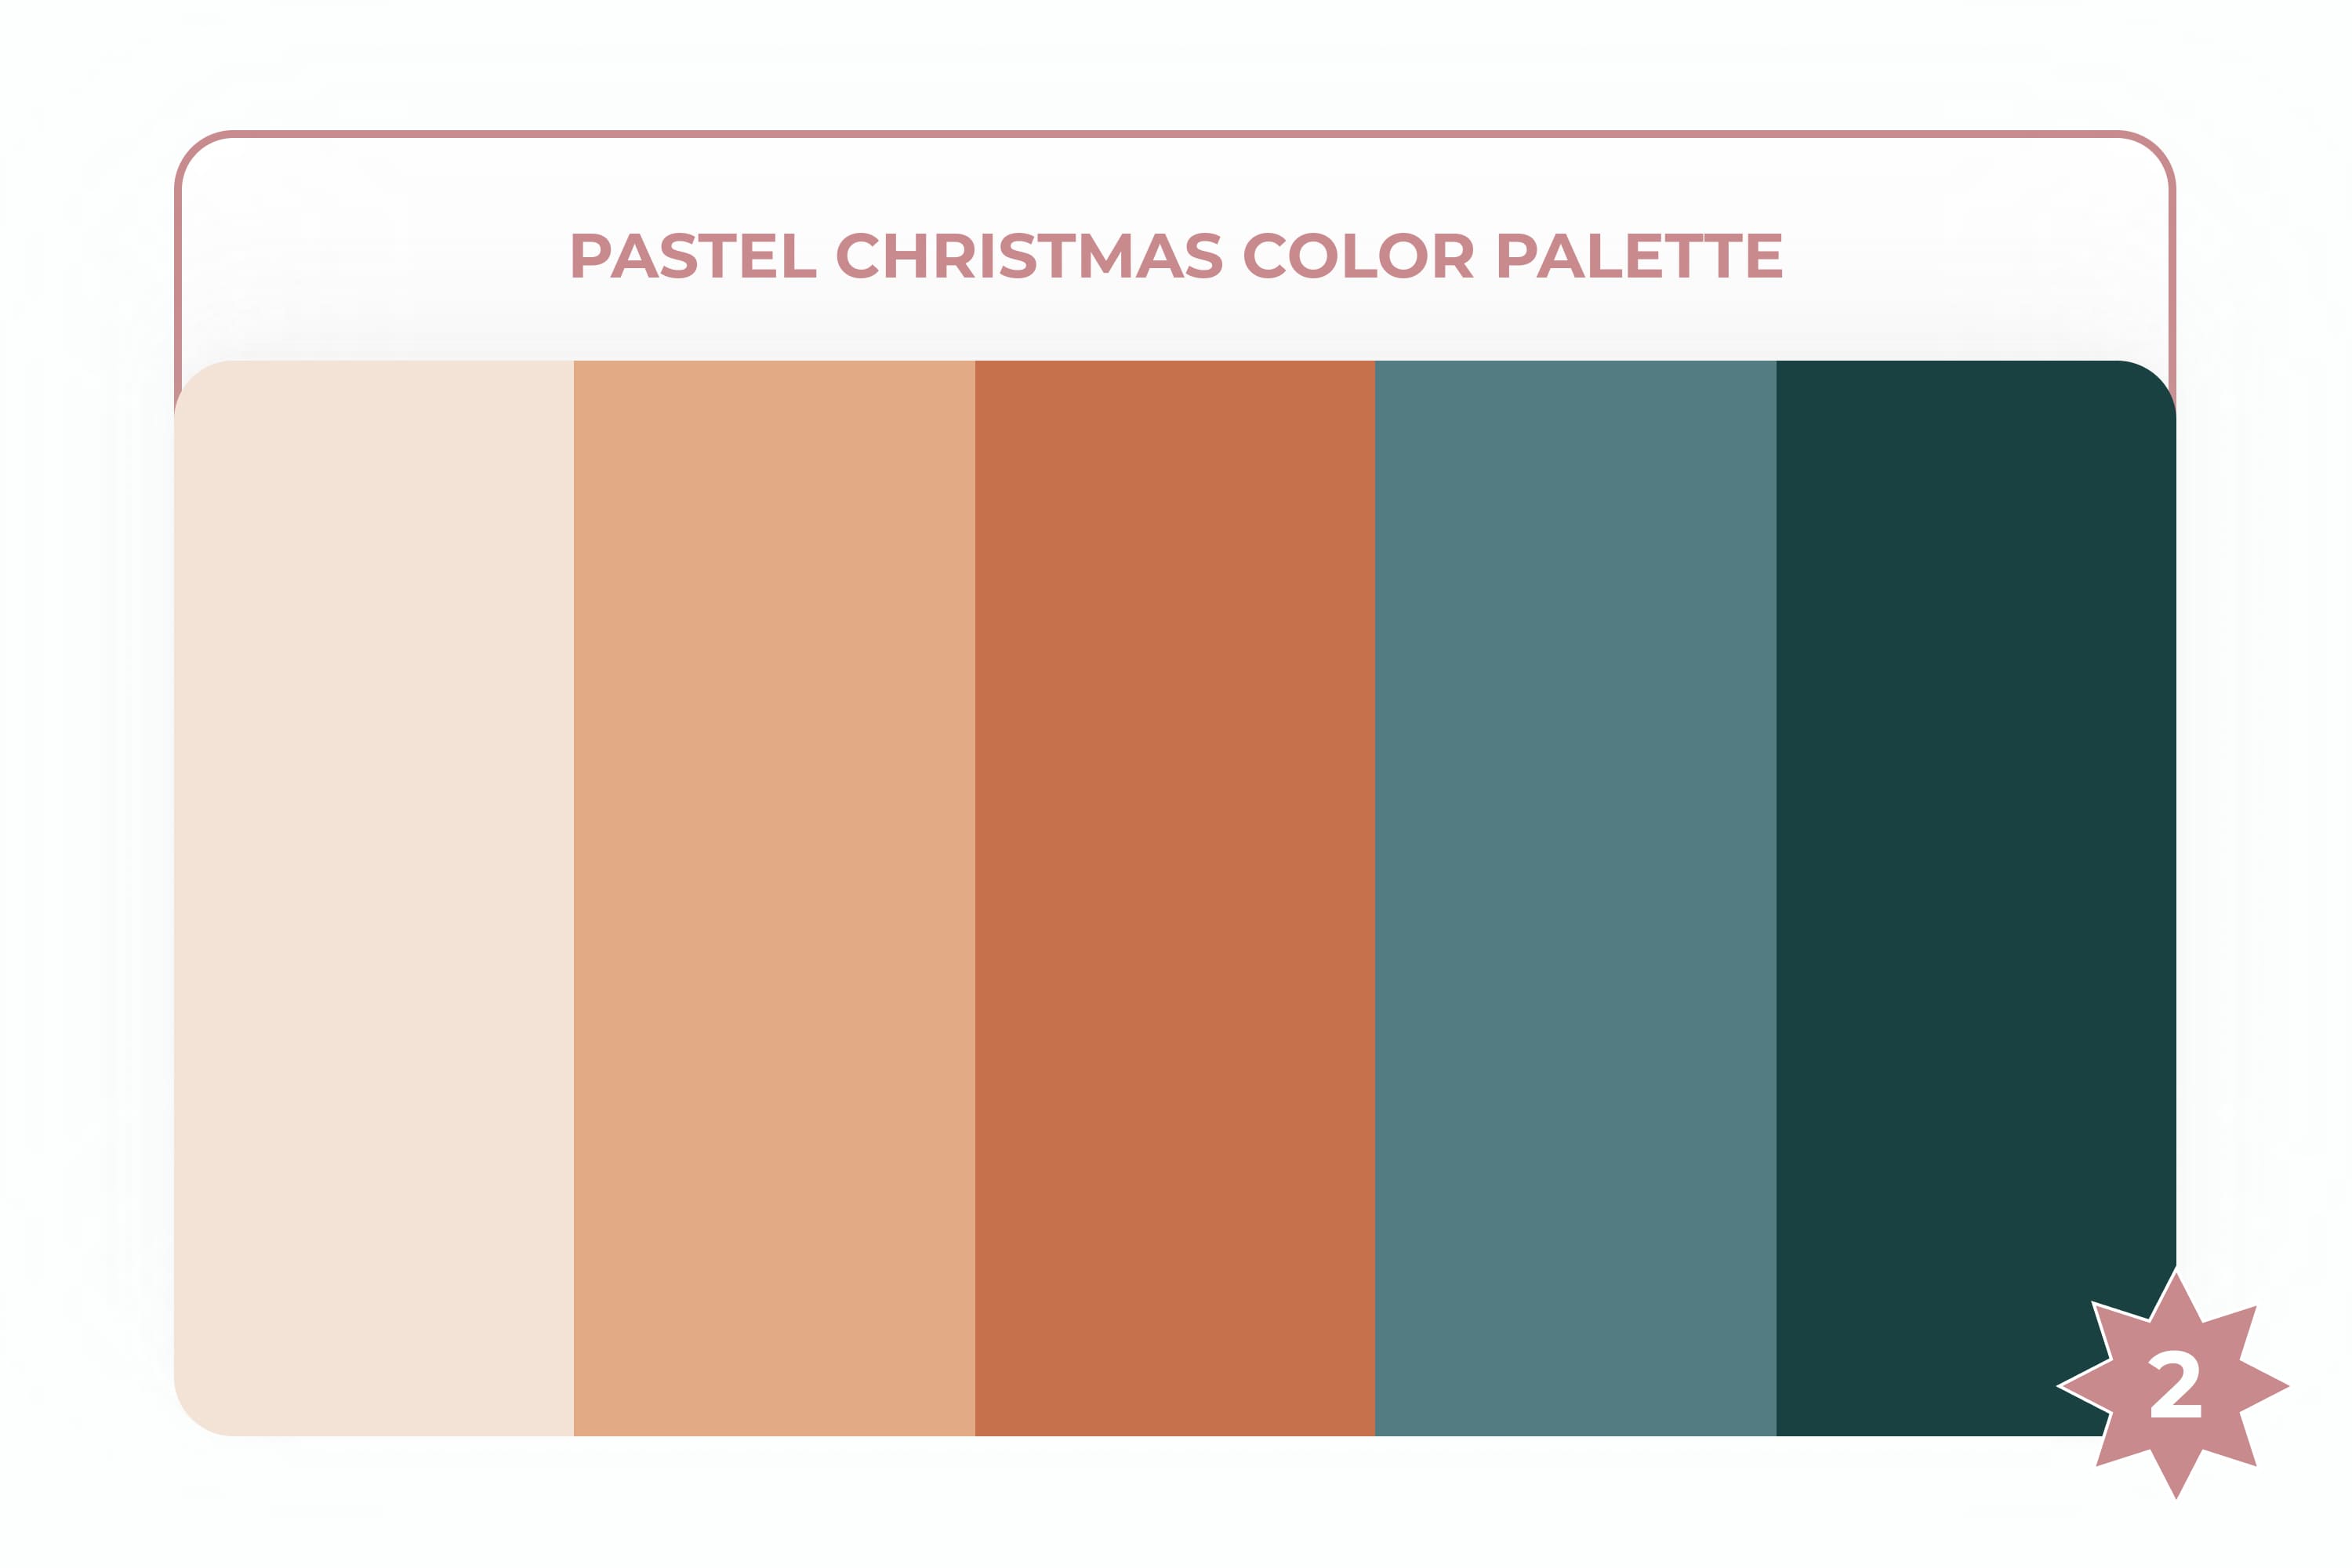 Collage of colored stripes in a pastel palette with green and beige.